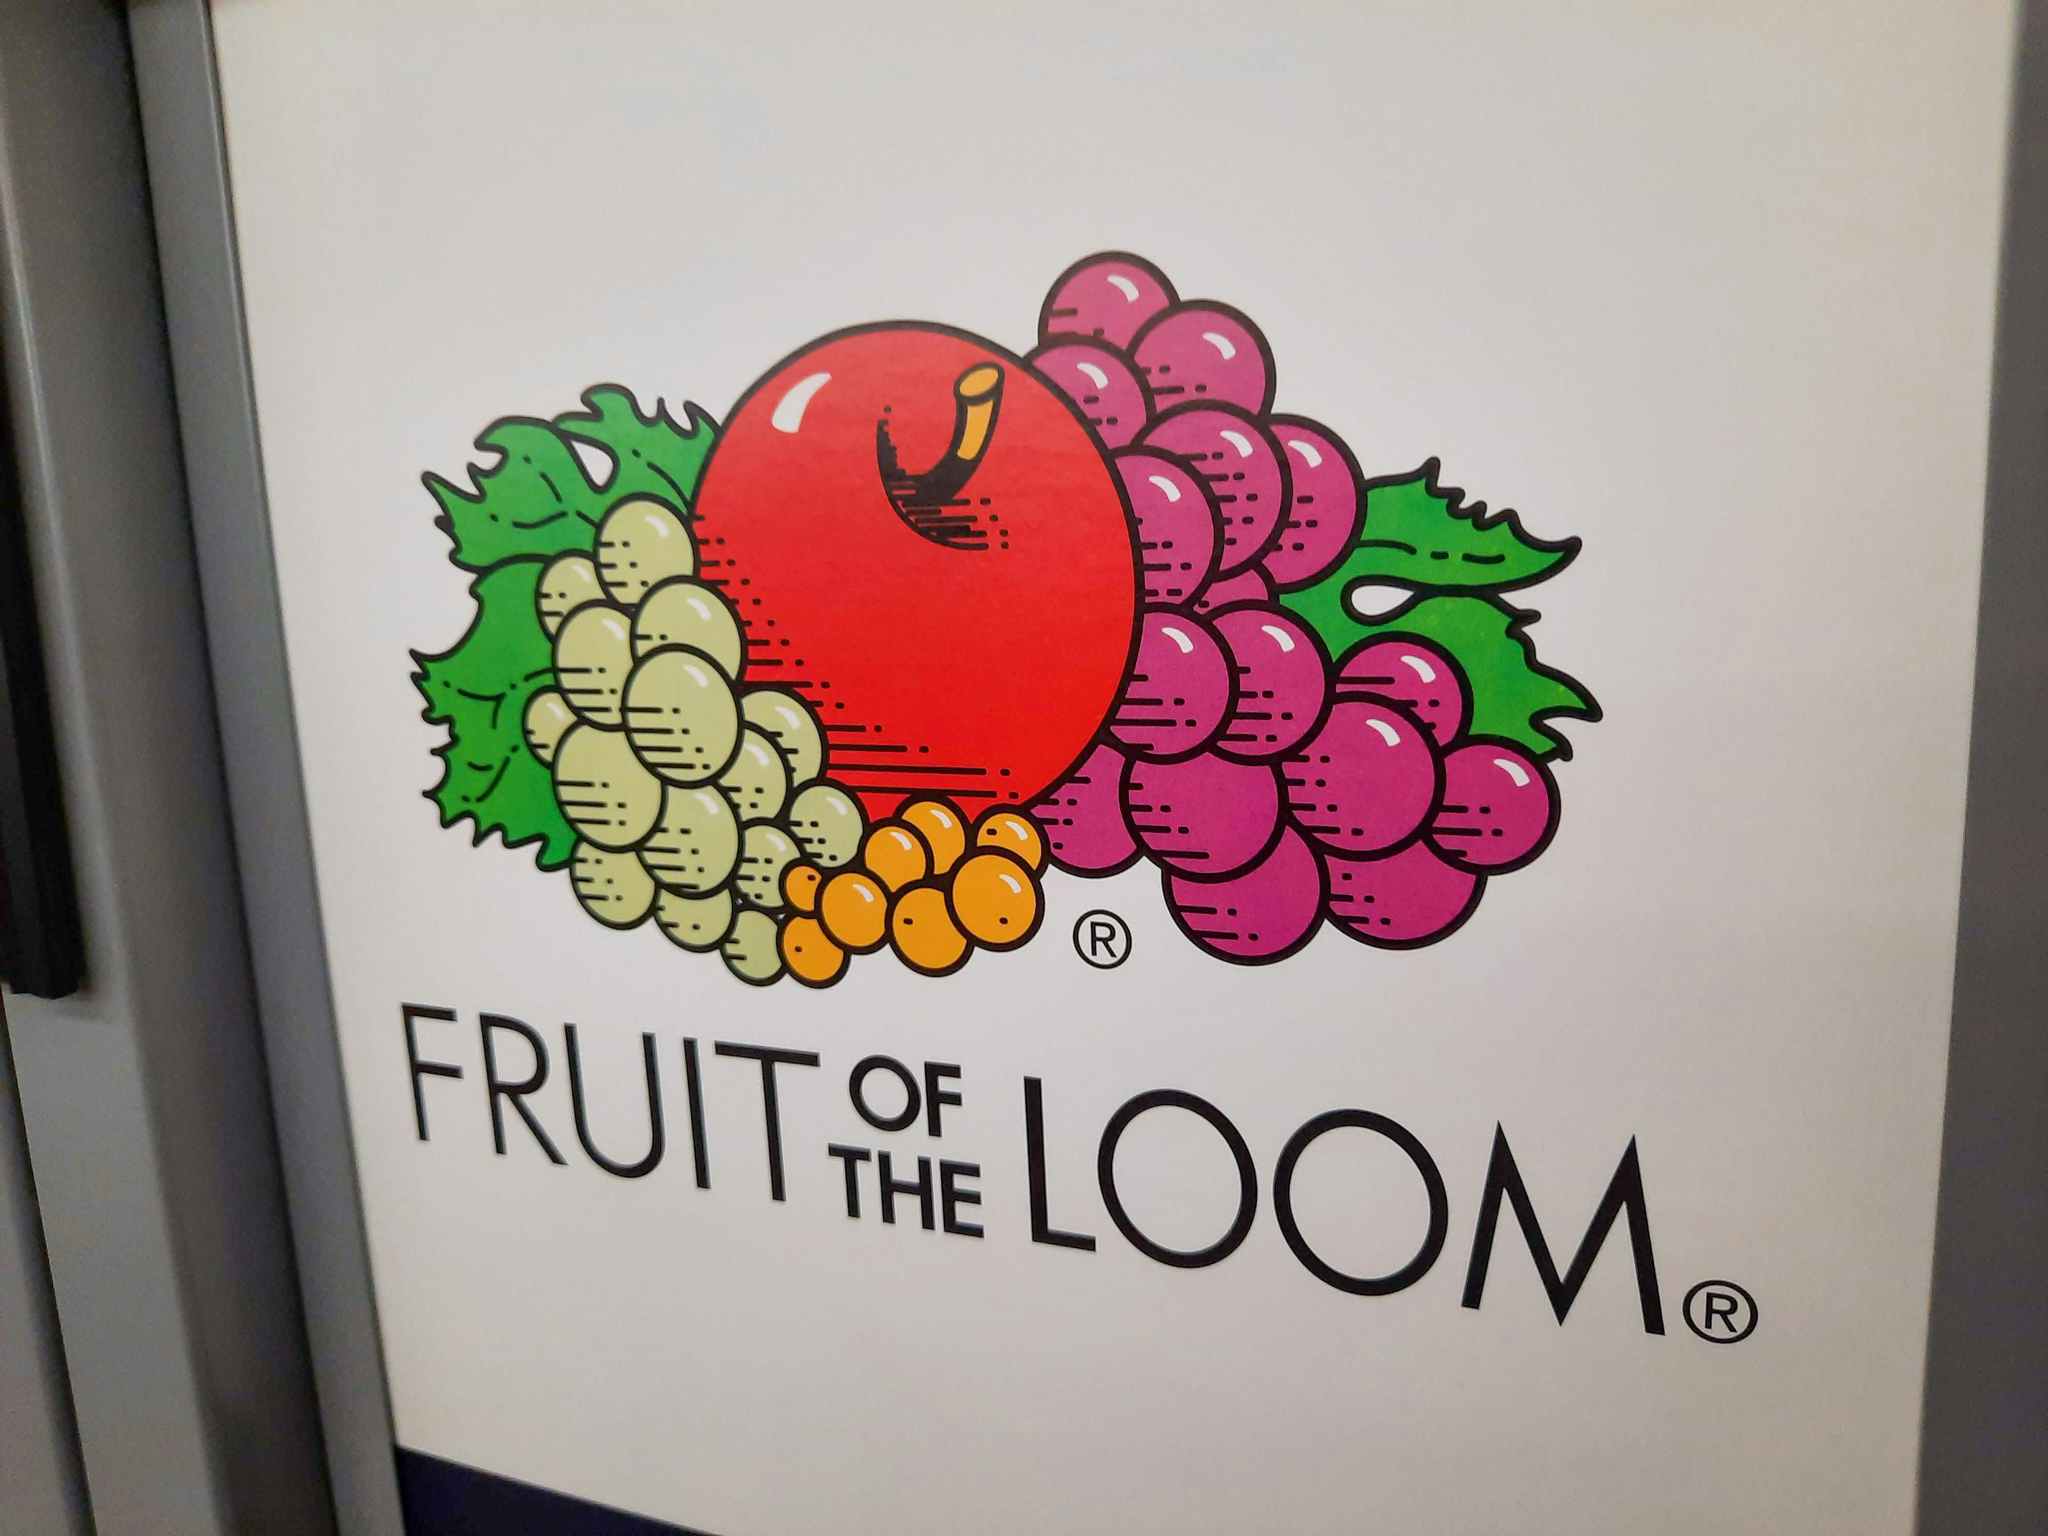 Fruit of the Loom Sale at Walmart: Shirts, Tanks, and Boxers, Just $2 Each